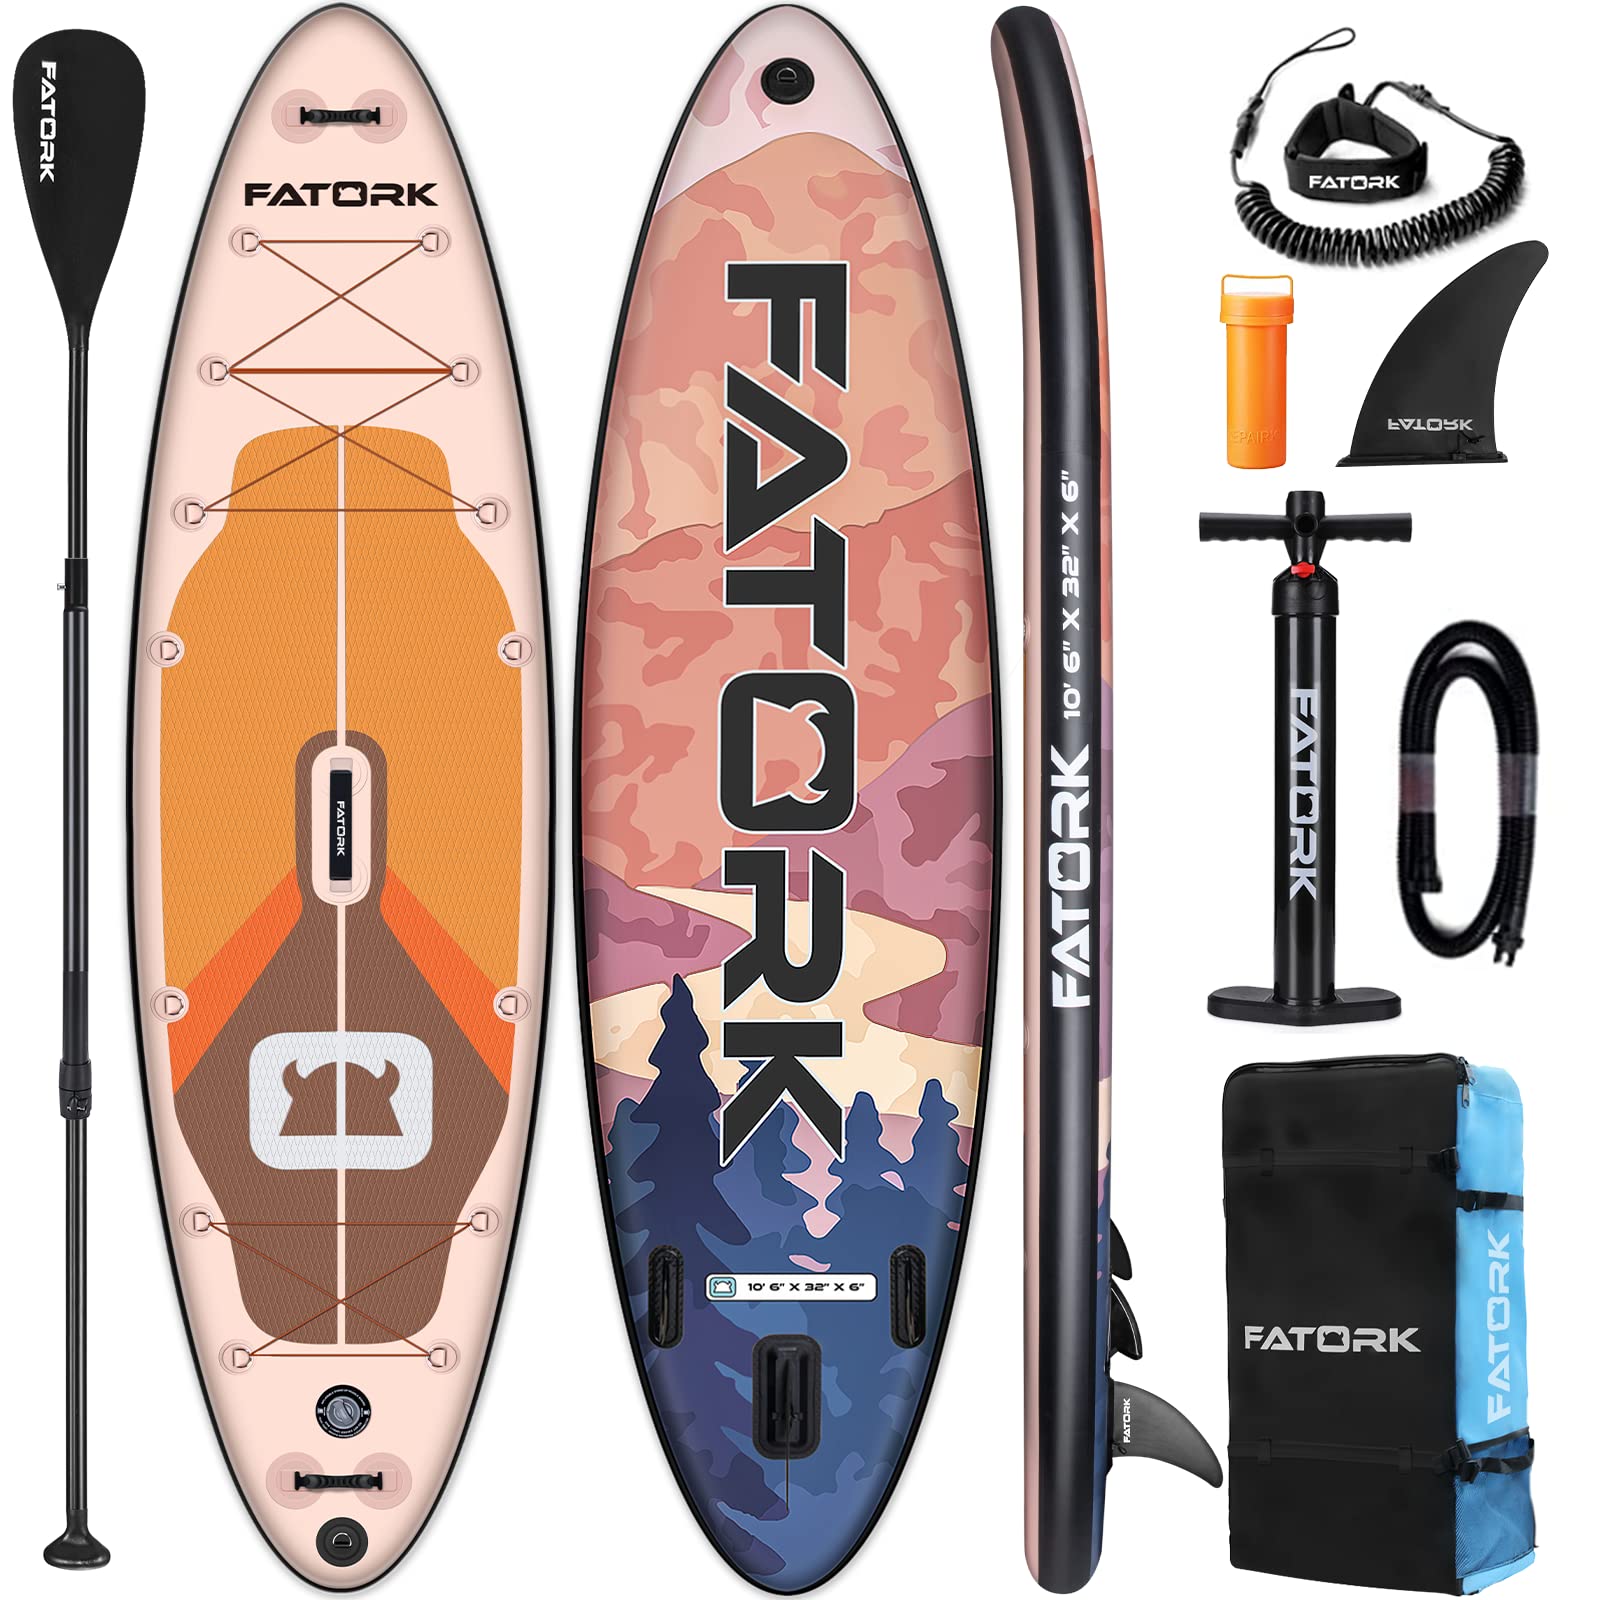 A paddle and fatork stand up paddle board